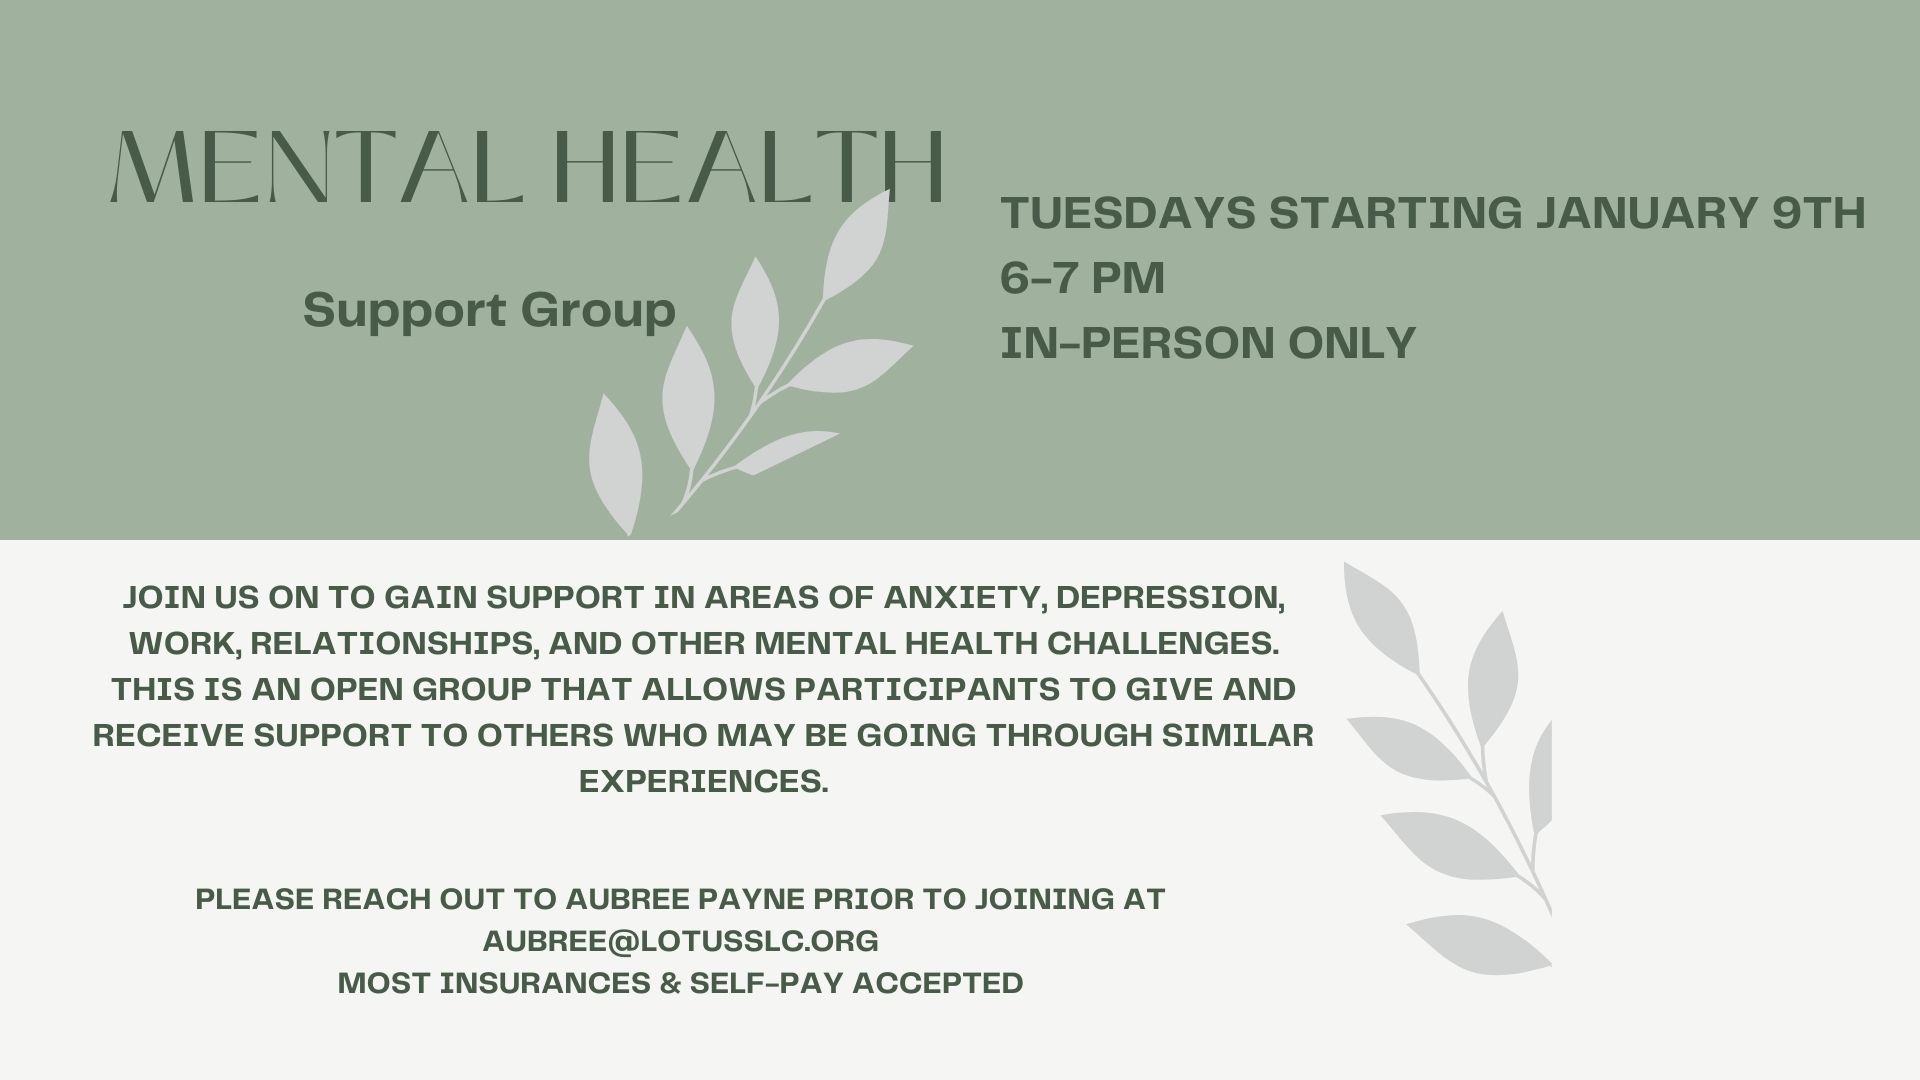 Mental Health support group information